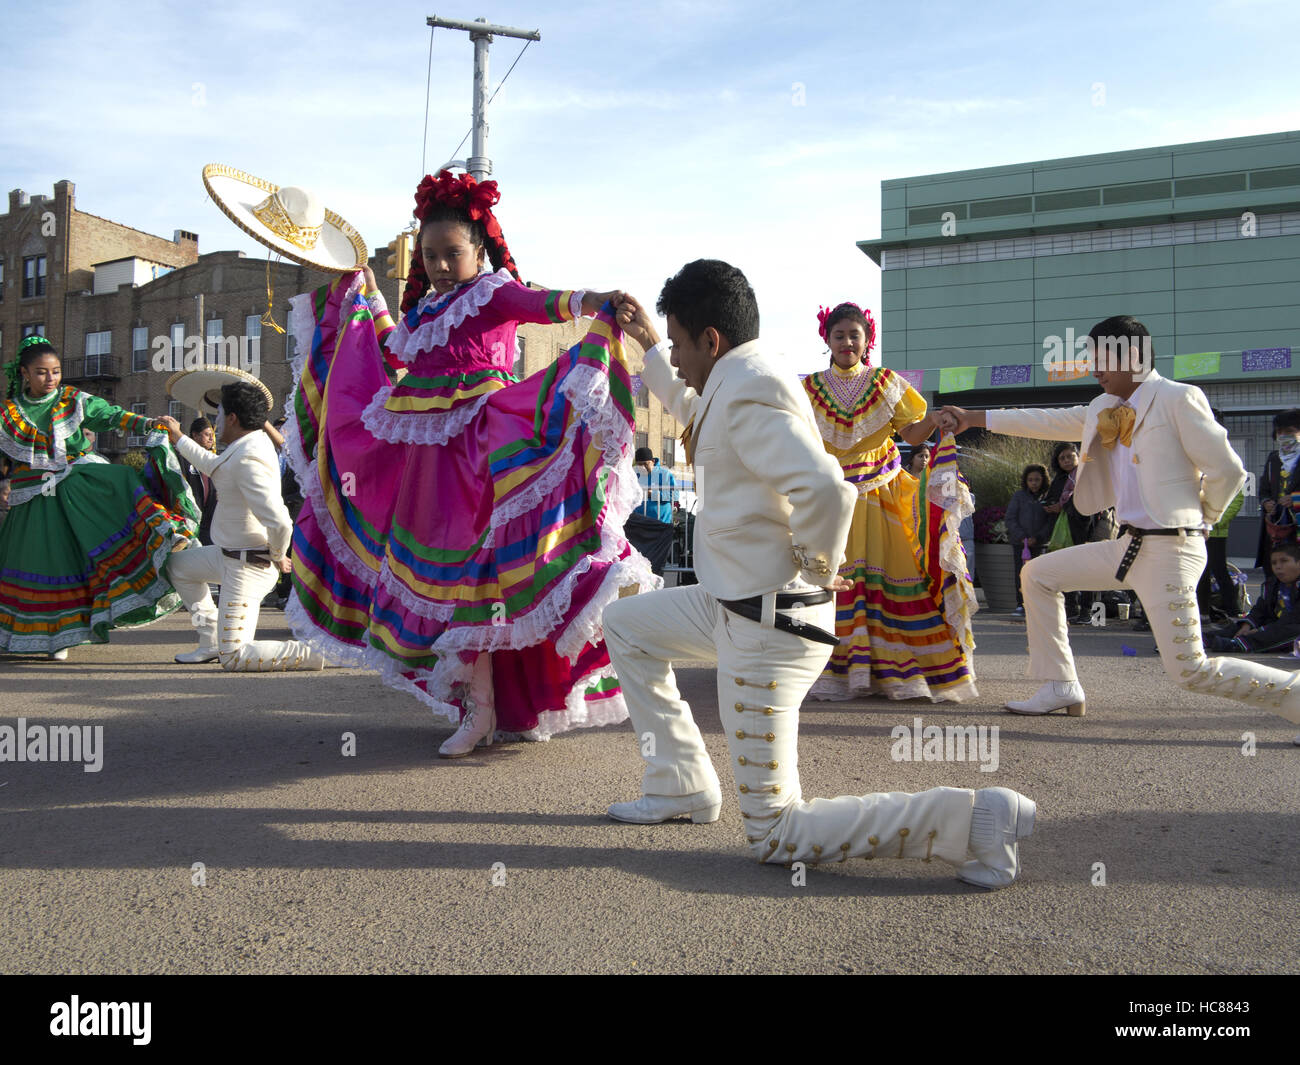 Mexican, folkloric dancers perform The Mexican Hat Dance at First Annual Day of the Dead Festival, Brooklyn, NY, Oct.30, 2016. Stock Photo